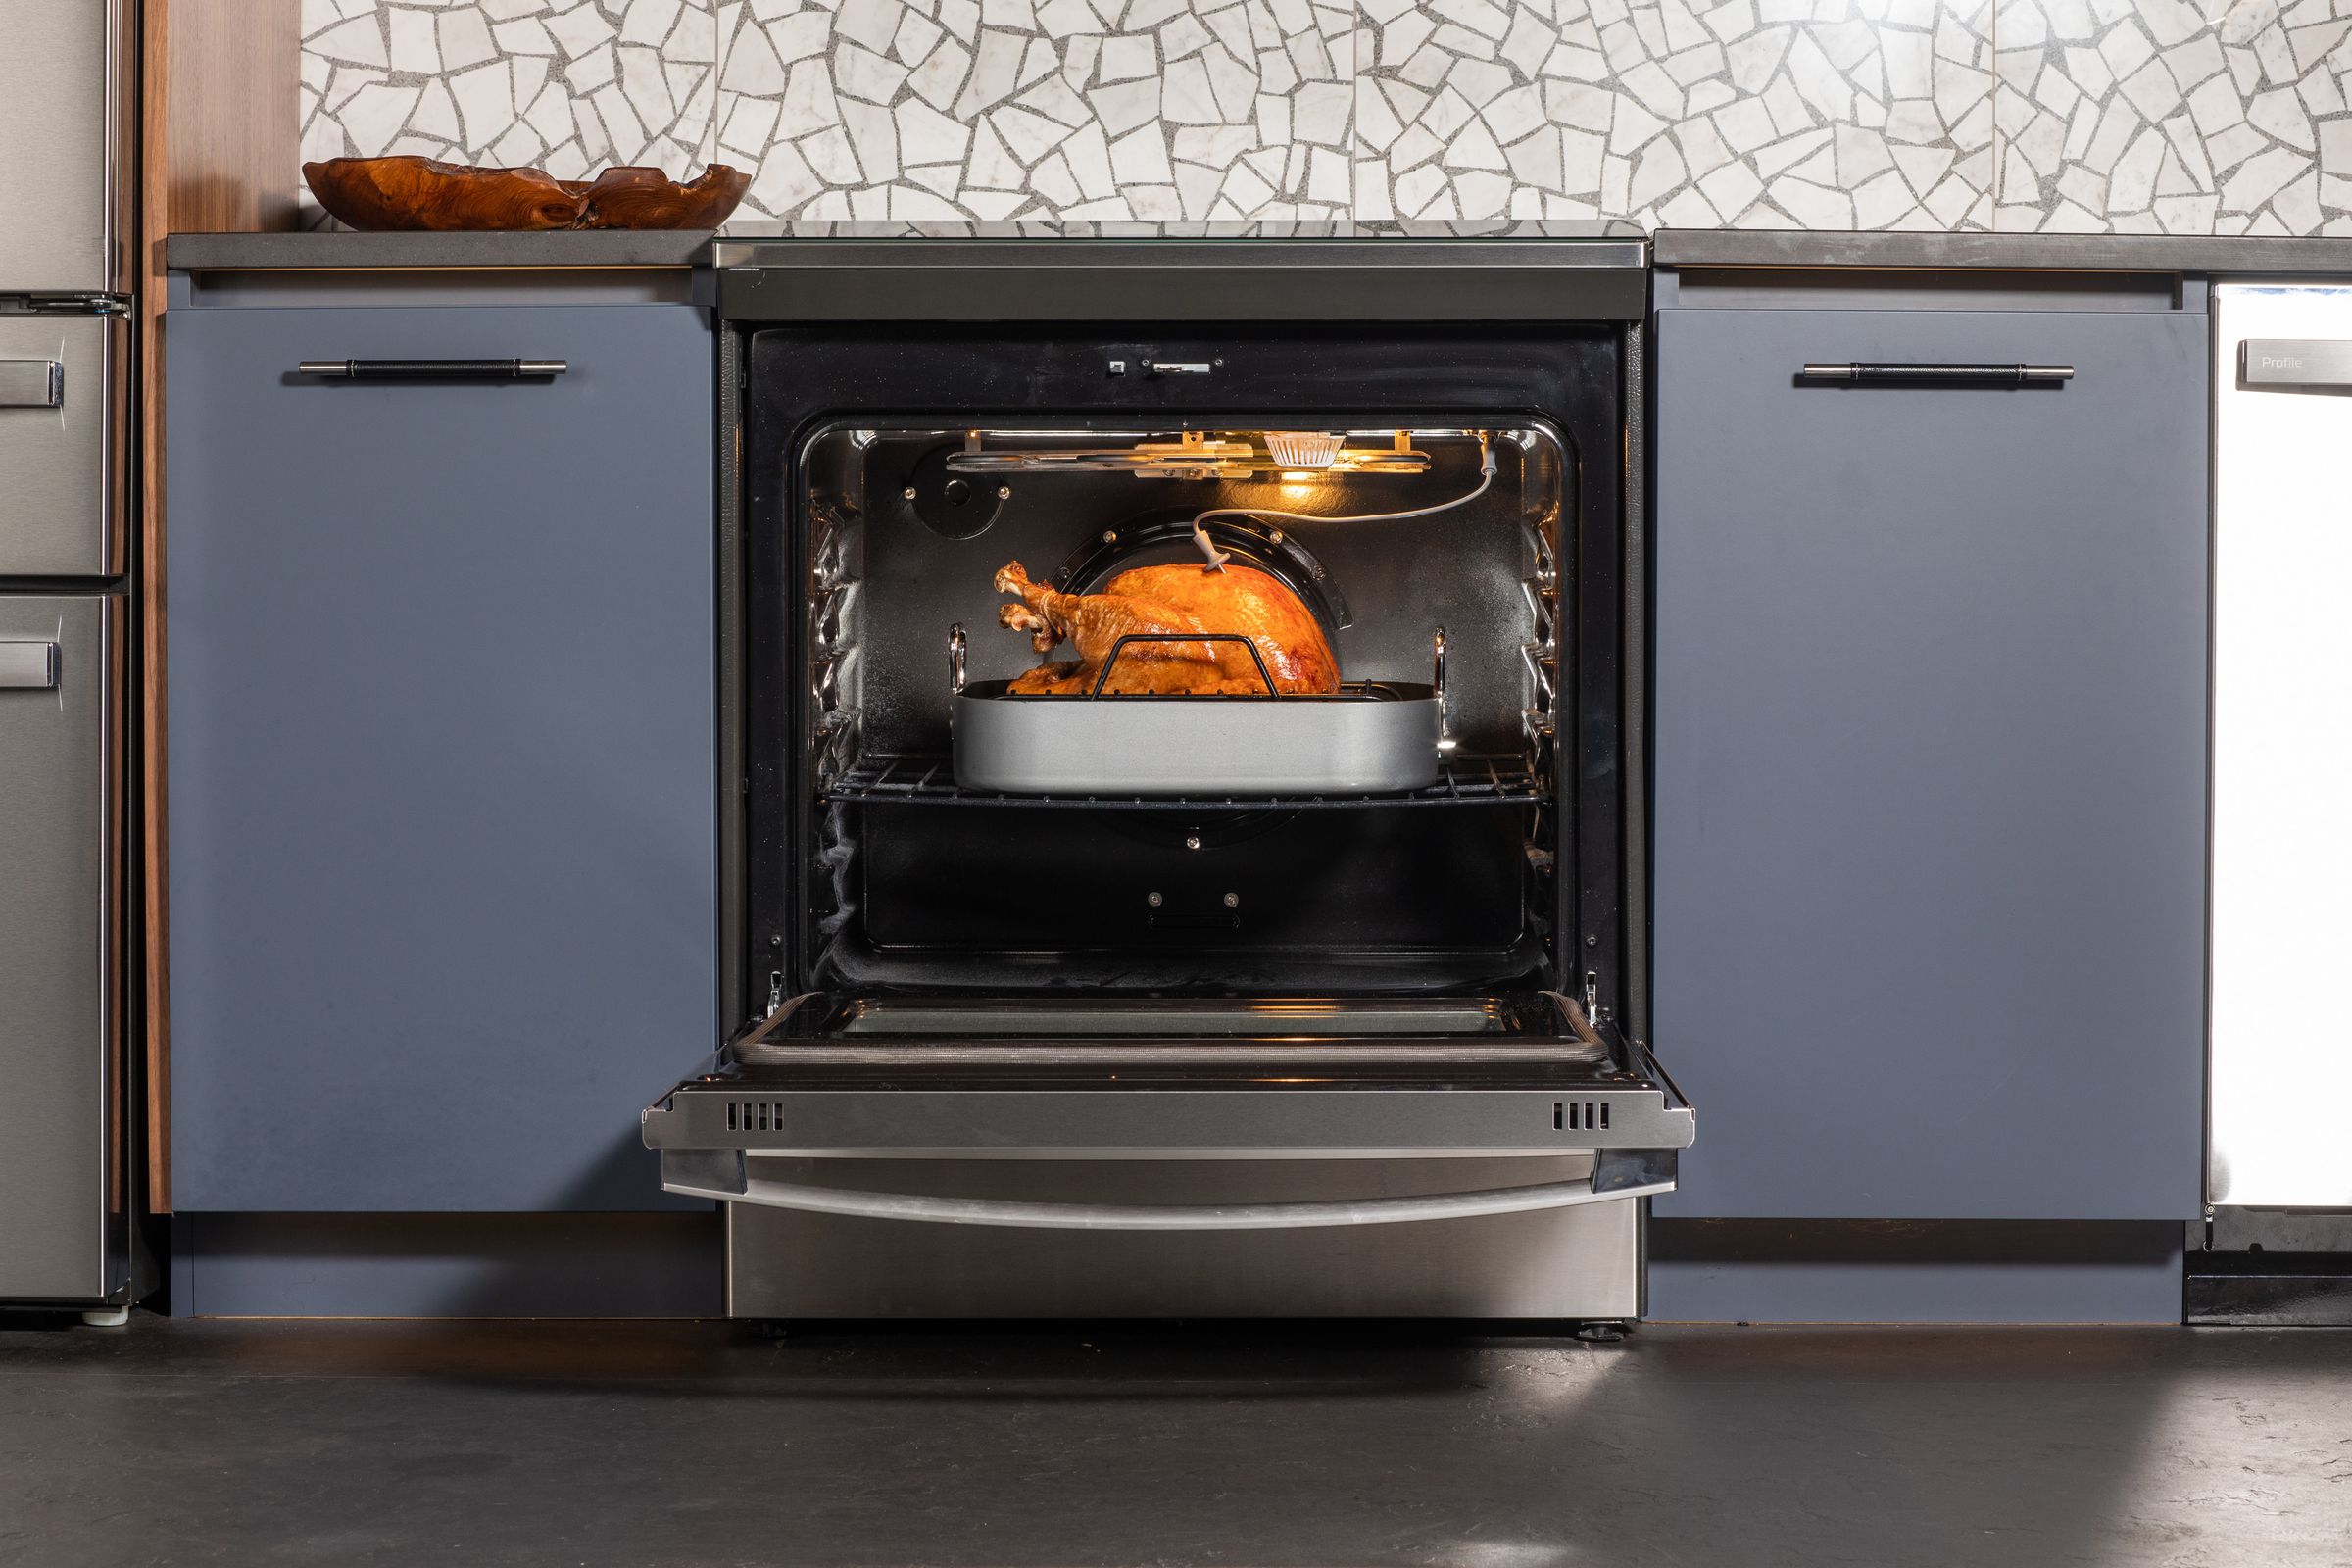 A new Turkey Mode coming to GE’s Wi-Fi connected ovens and ranges this week promises to cook the perfect turkey